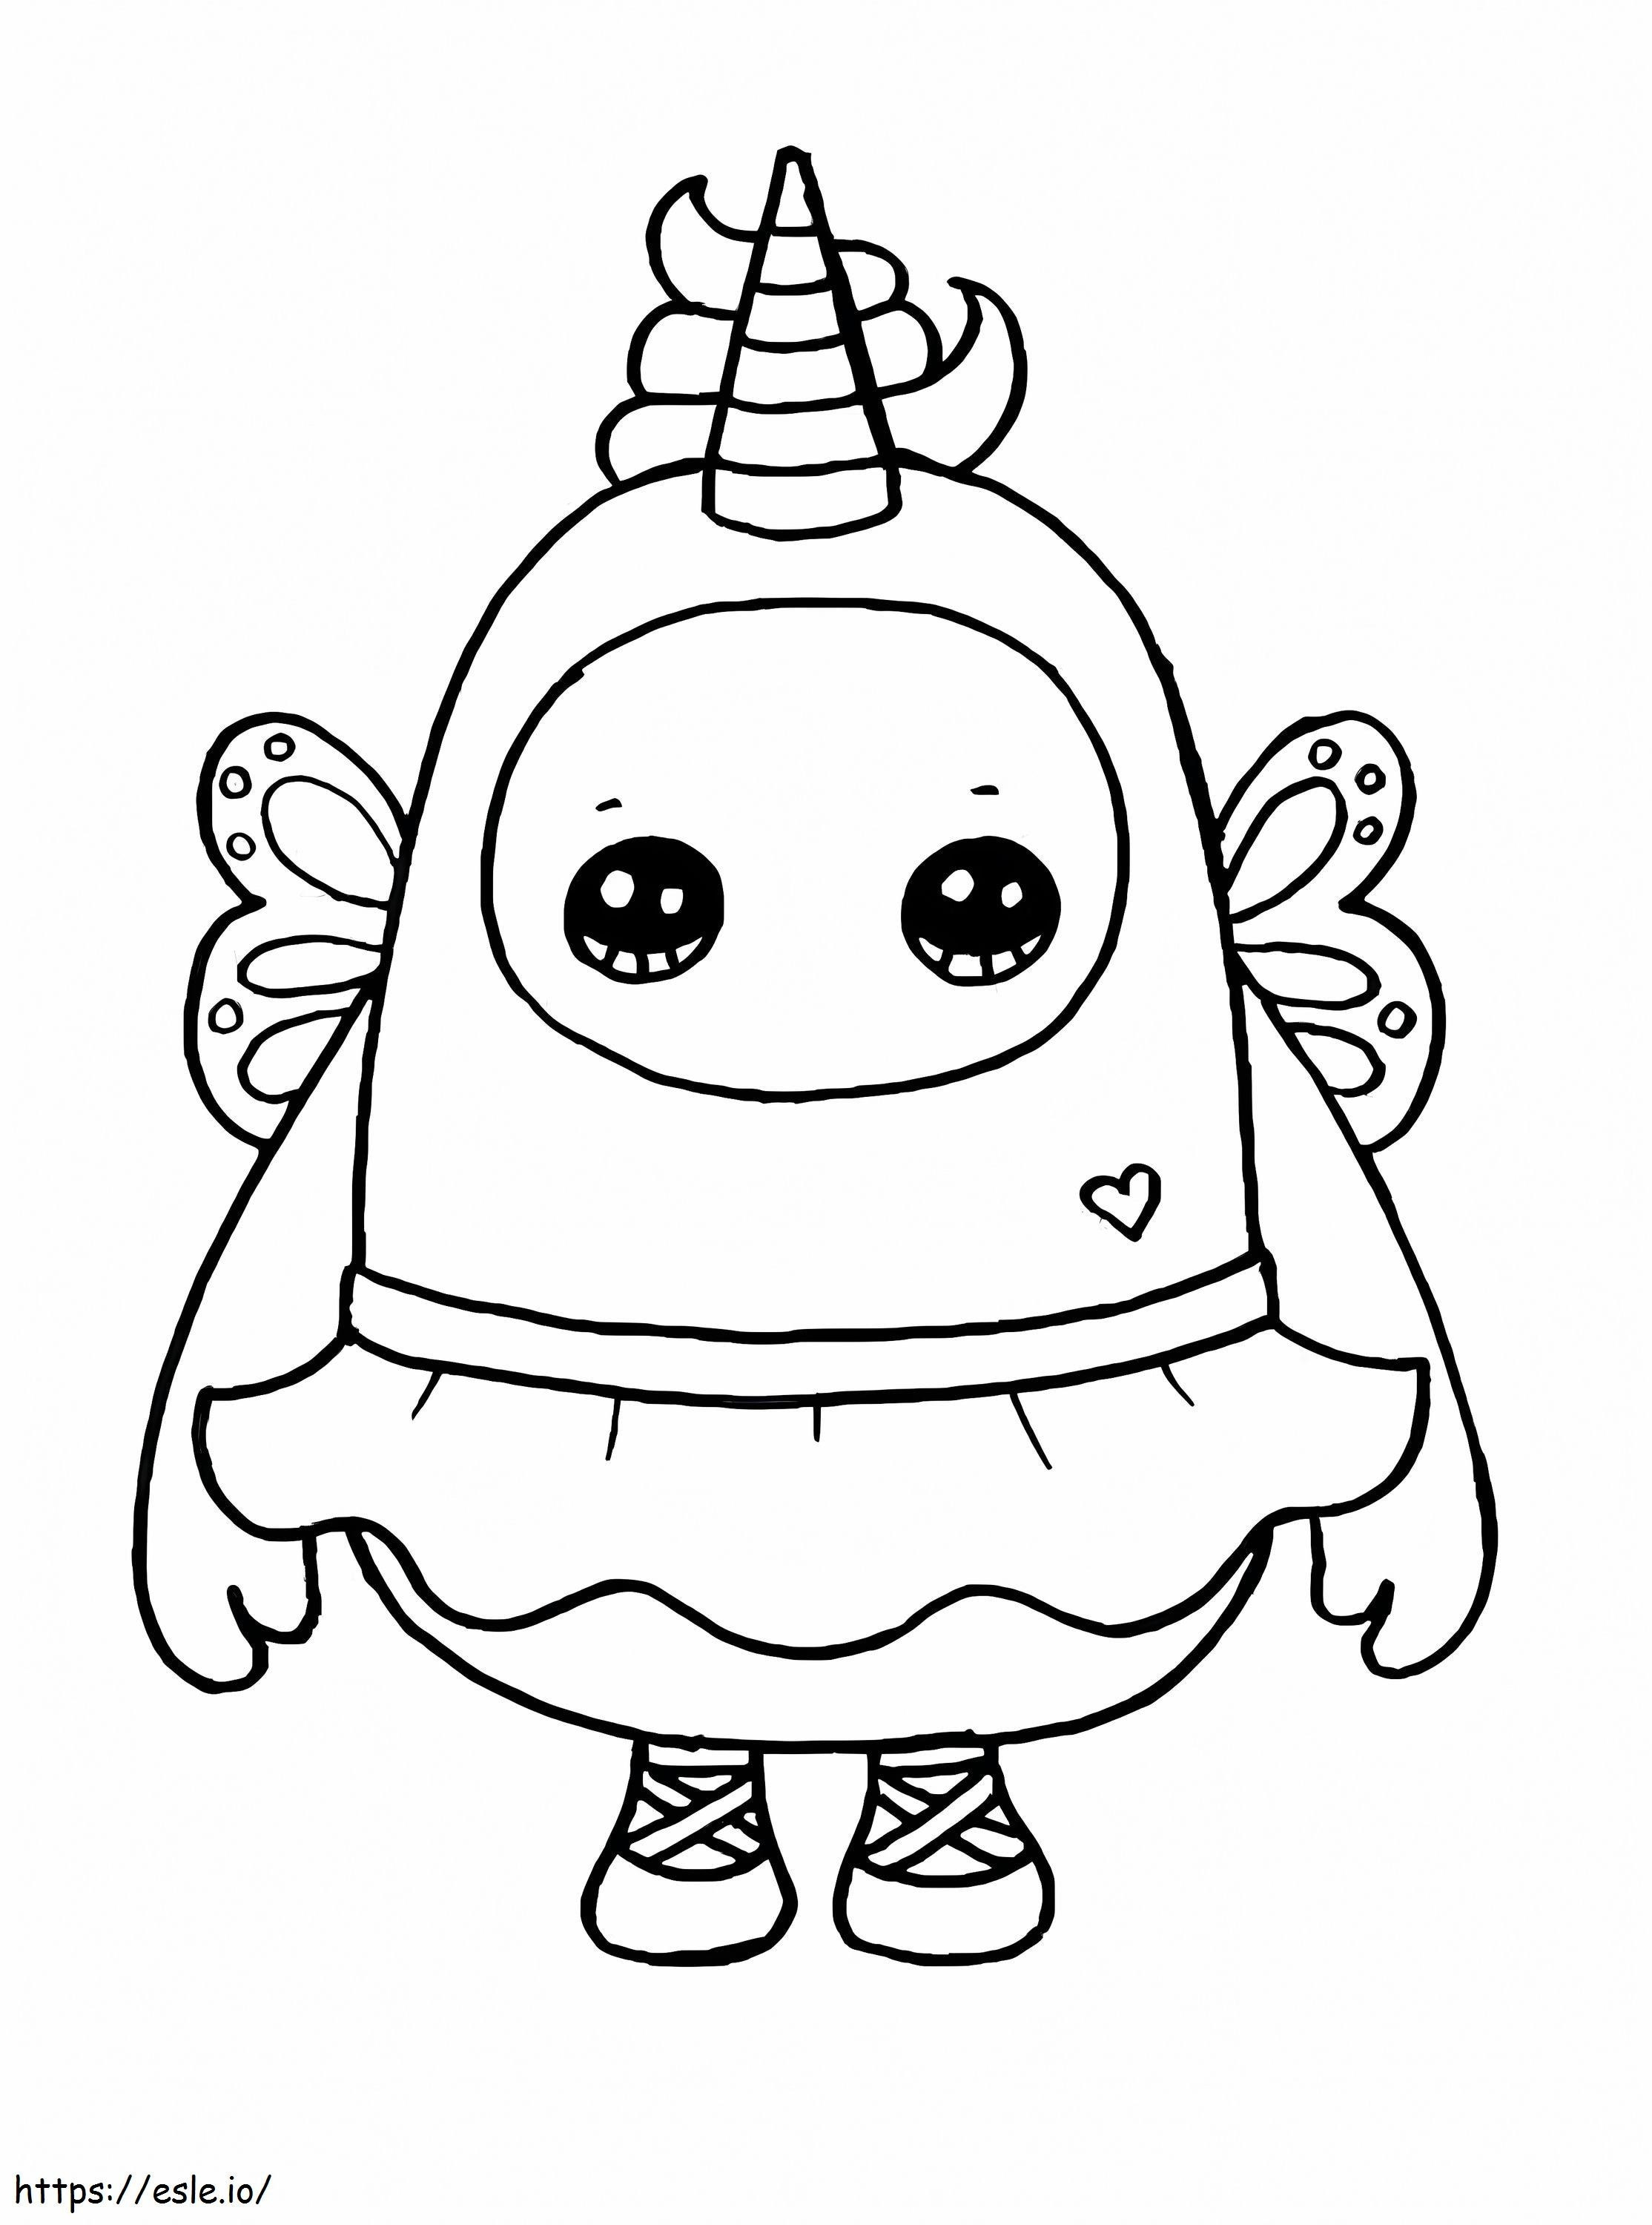 Fairycorn Fall Guys coloring page